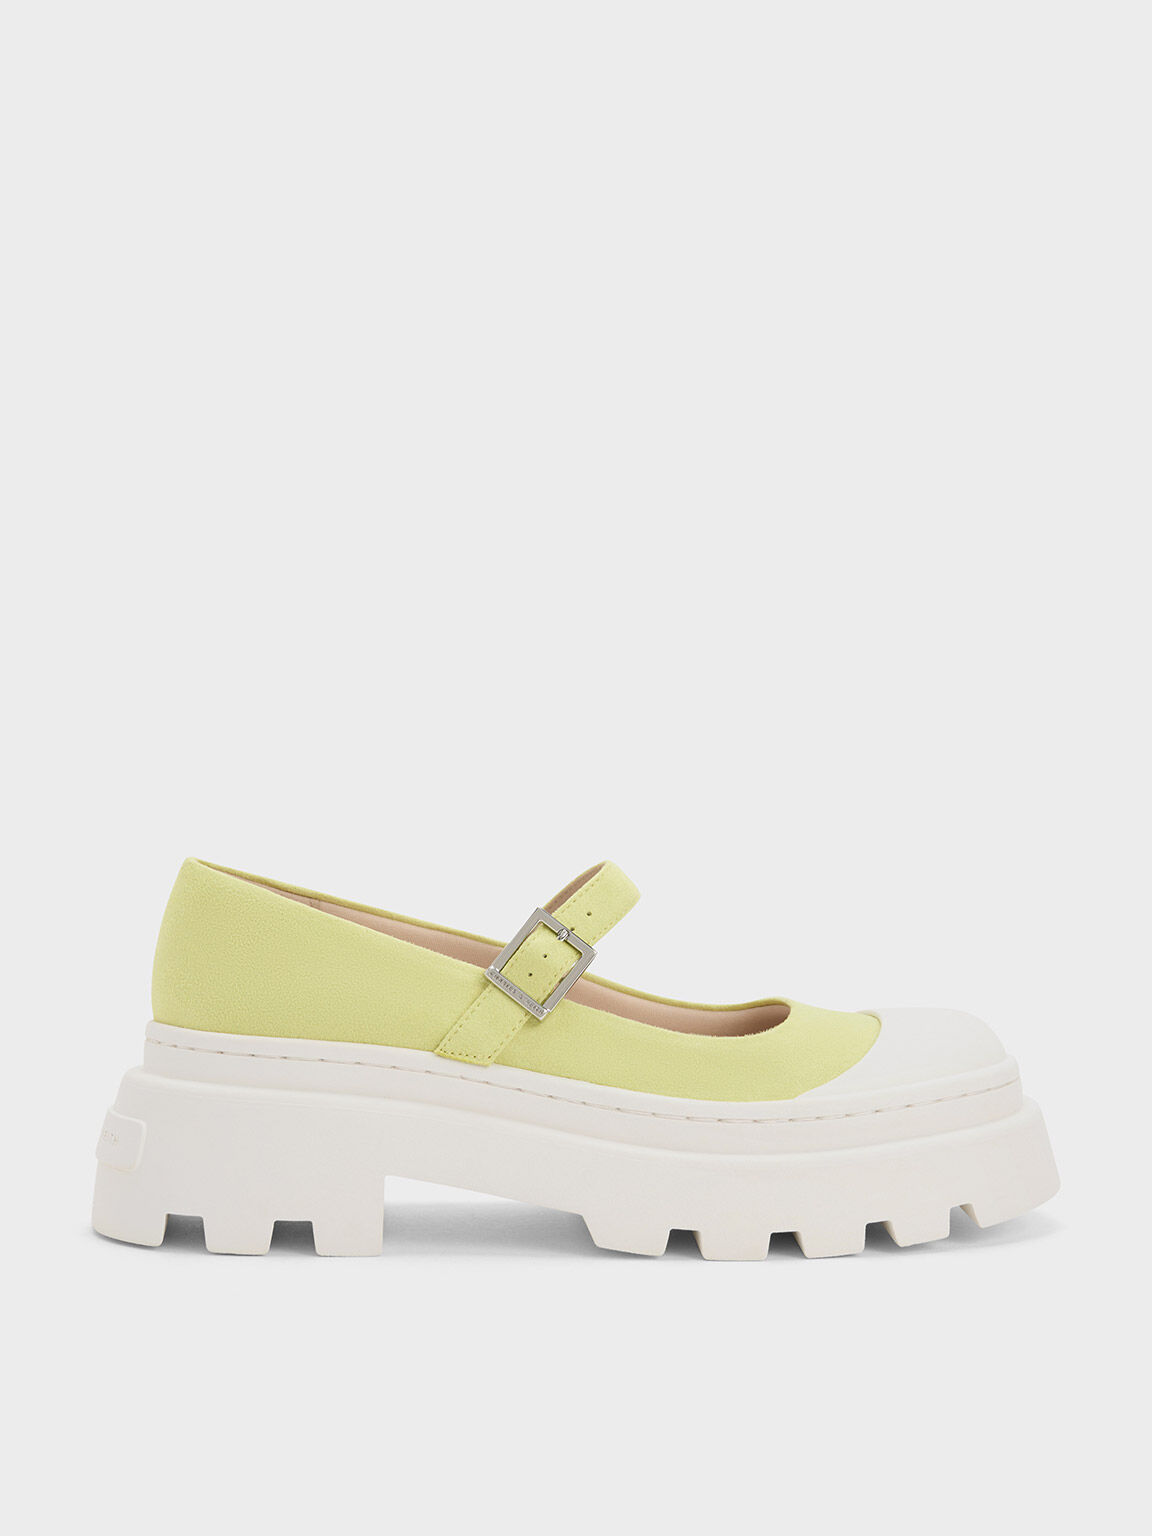 Indra Textured Two-Tone Platform Mary Janes, Lime, hi-res